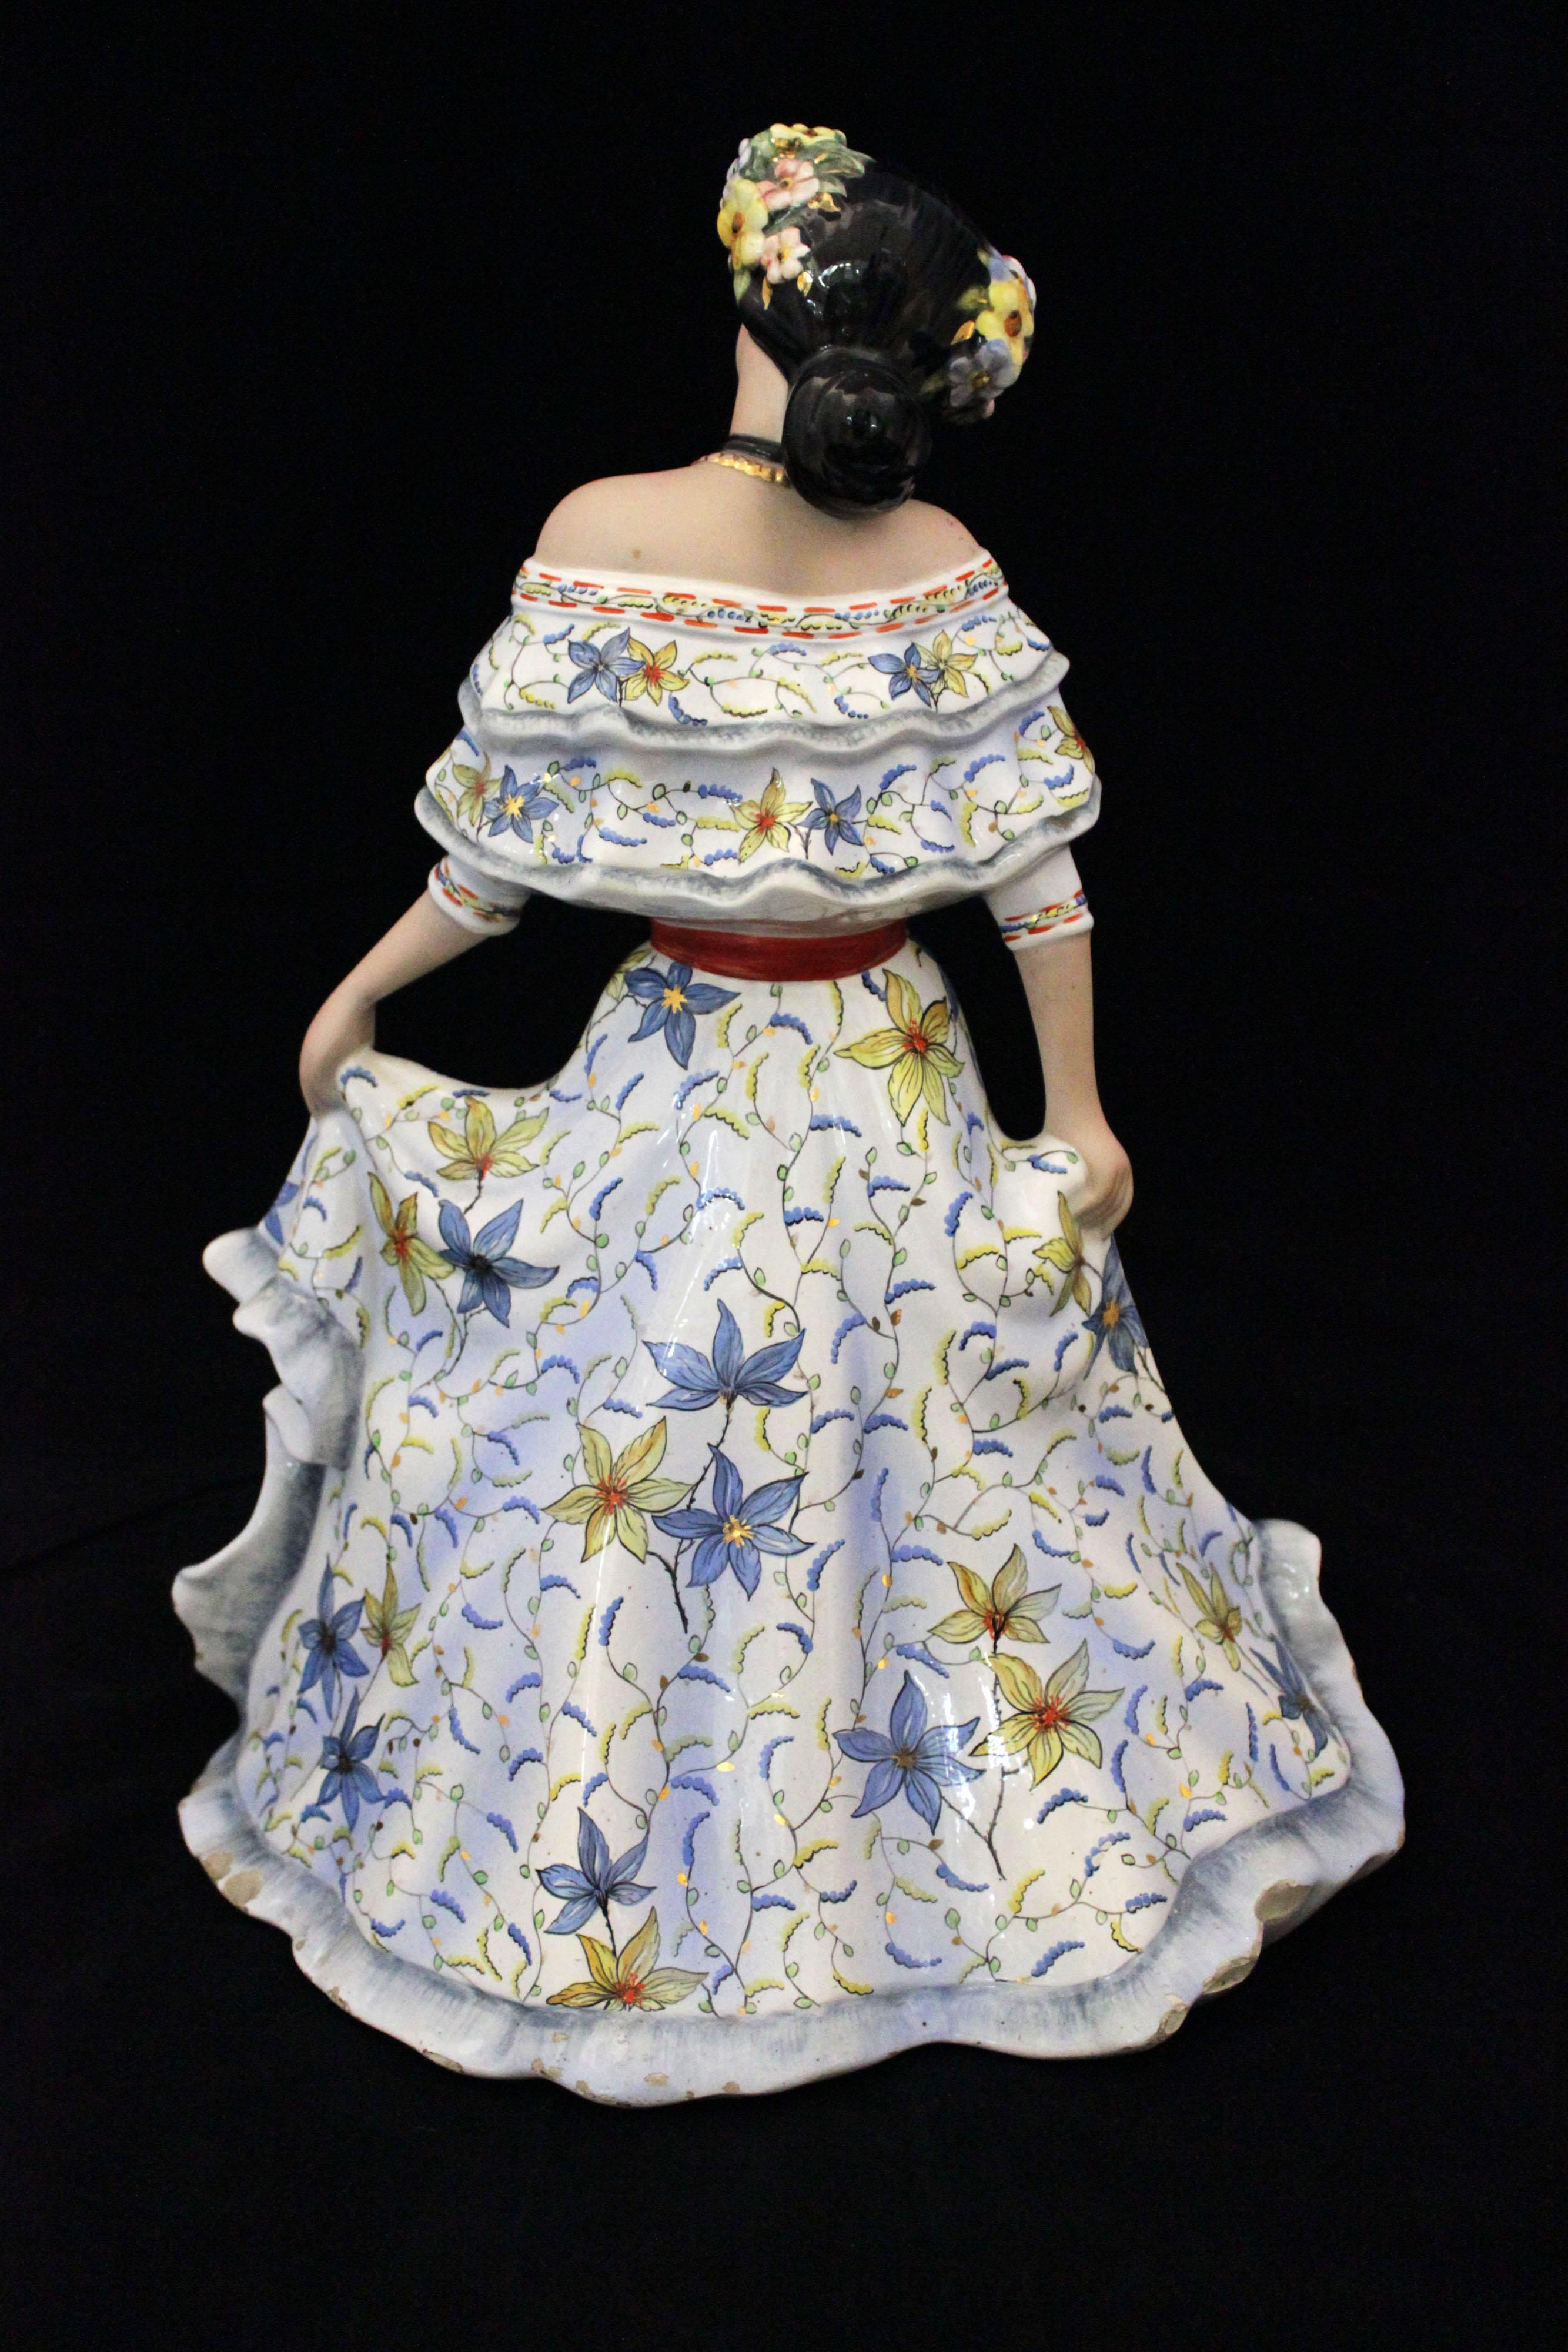 Generously sized ceramic figure, depicting a happy latin girl, dressed in makeup and festive dress. Finely sculpted and painted, the colors are united with the joyful character of the girl, giving the already large work a strong positive impact. On